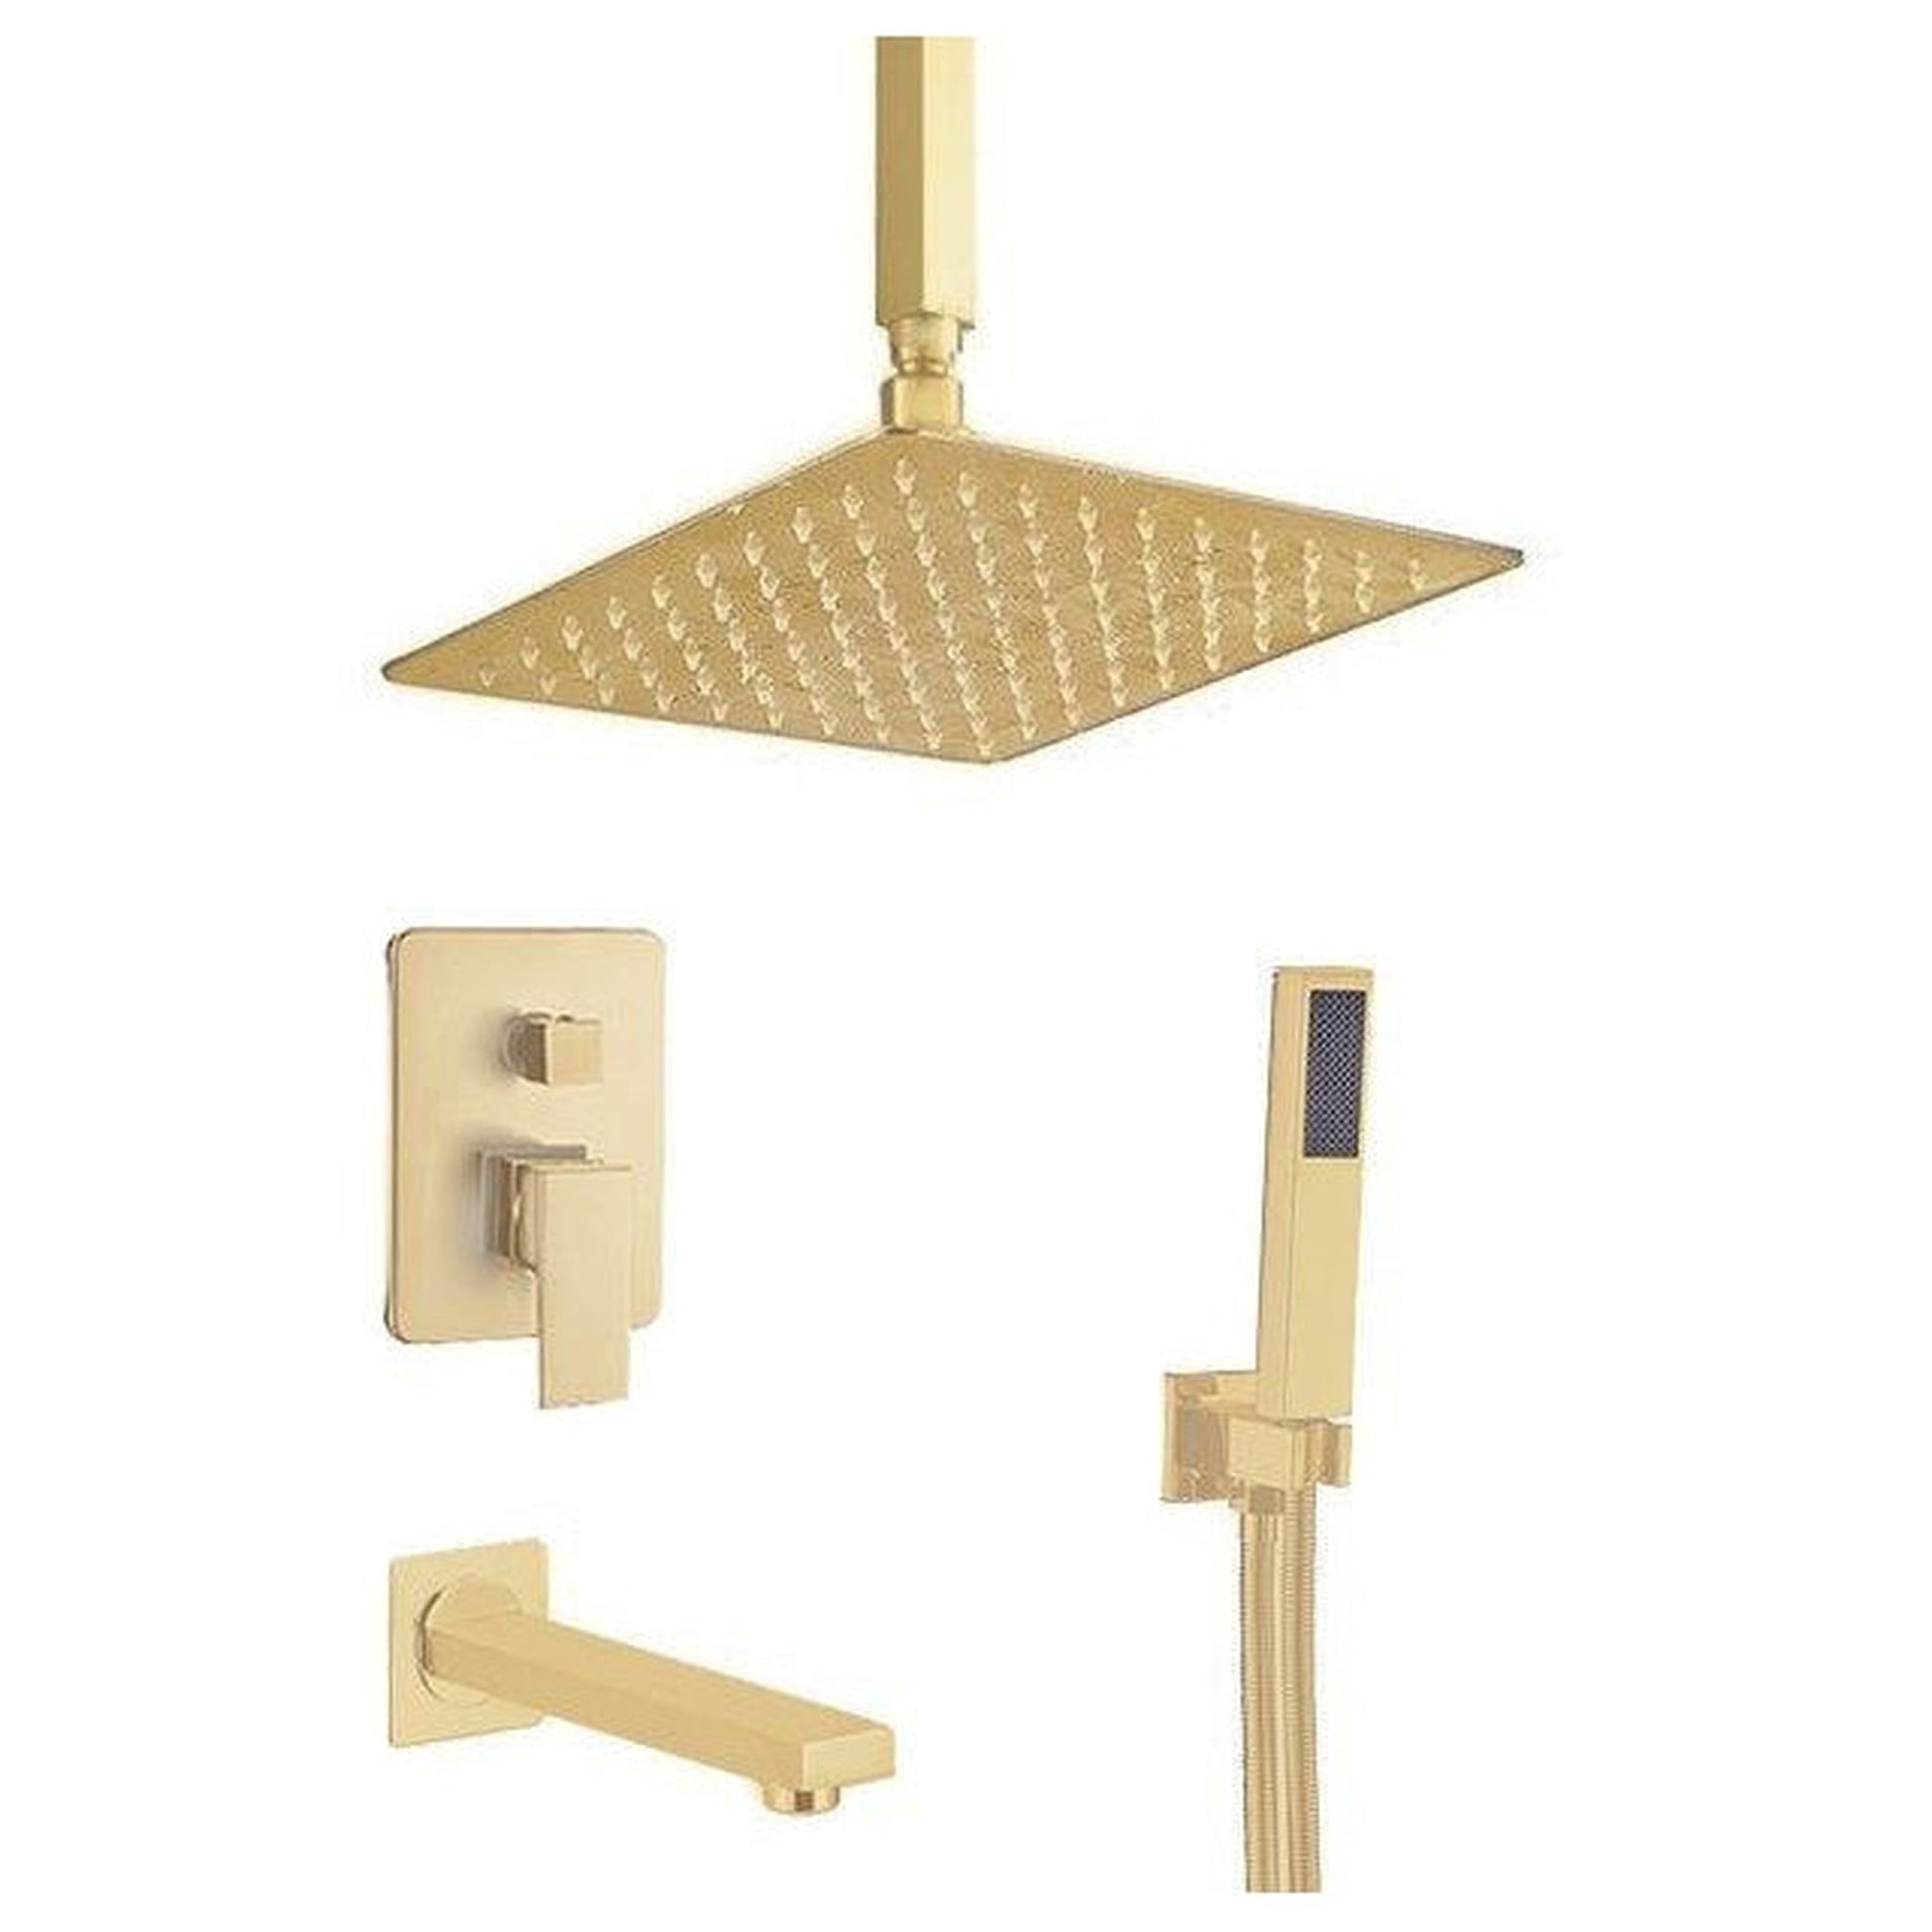 FontanaShowers Verona Creative Luxury 8" Gold Square Ceiling Mounted 3-Way Single Handle Mixer Shower System With Hand Shower and Tub Spout